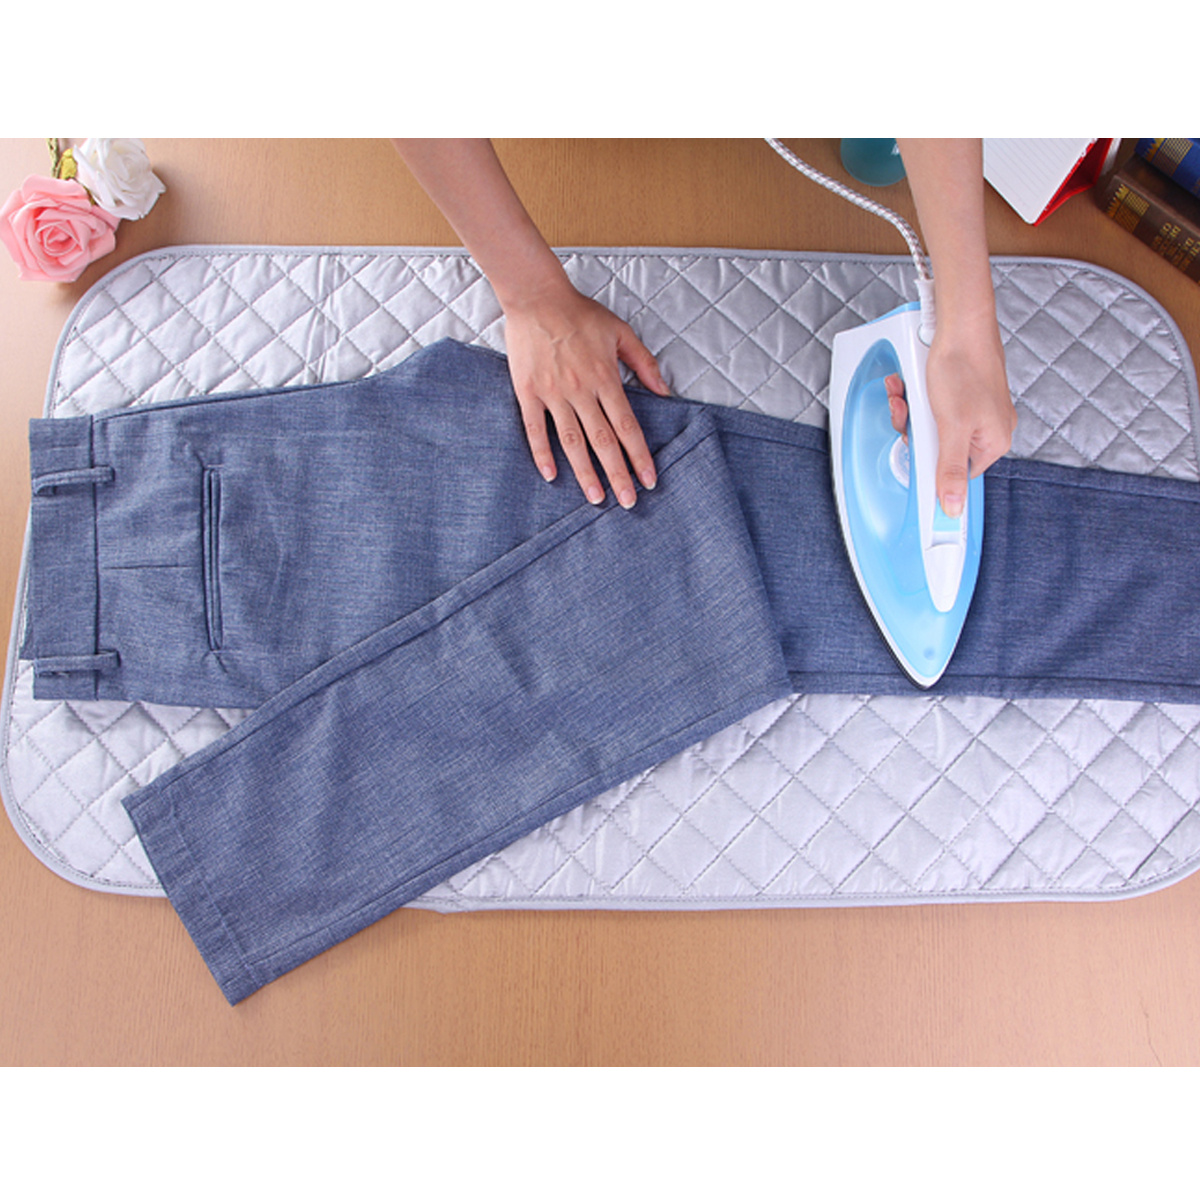 Ironing Mat Mini Ironing Board Pad Dryer Top Protector Mat Portable Ironing  Pad Mat Foldable Heat Resistant Iron Pad For Table